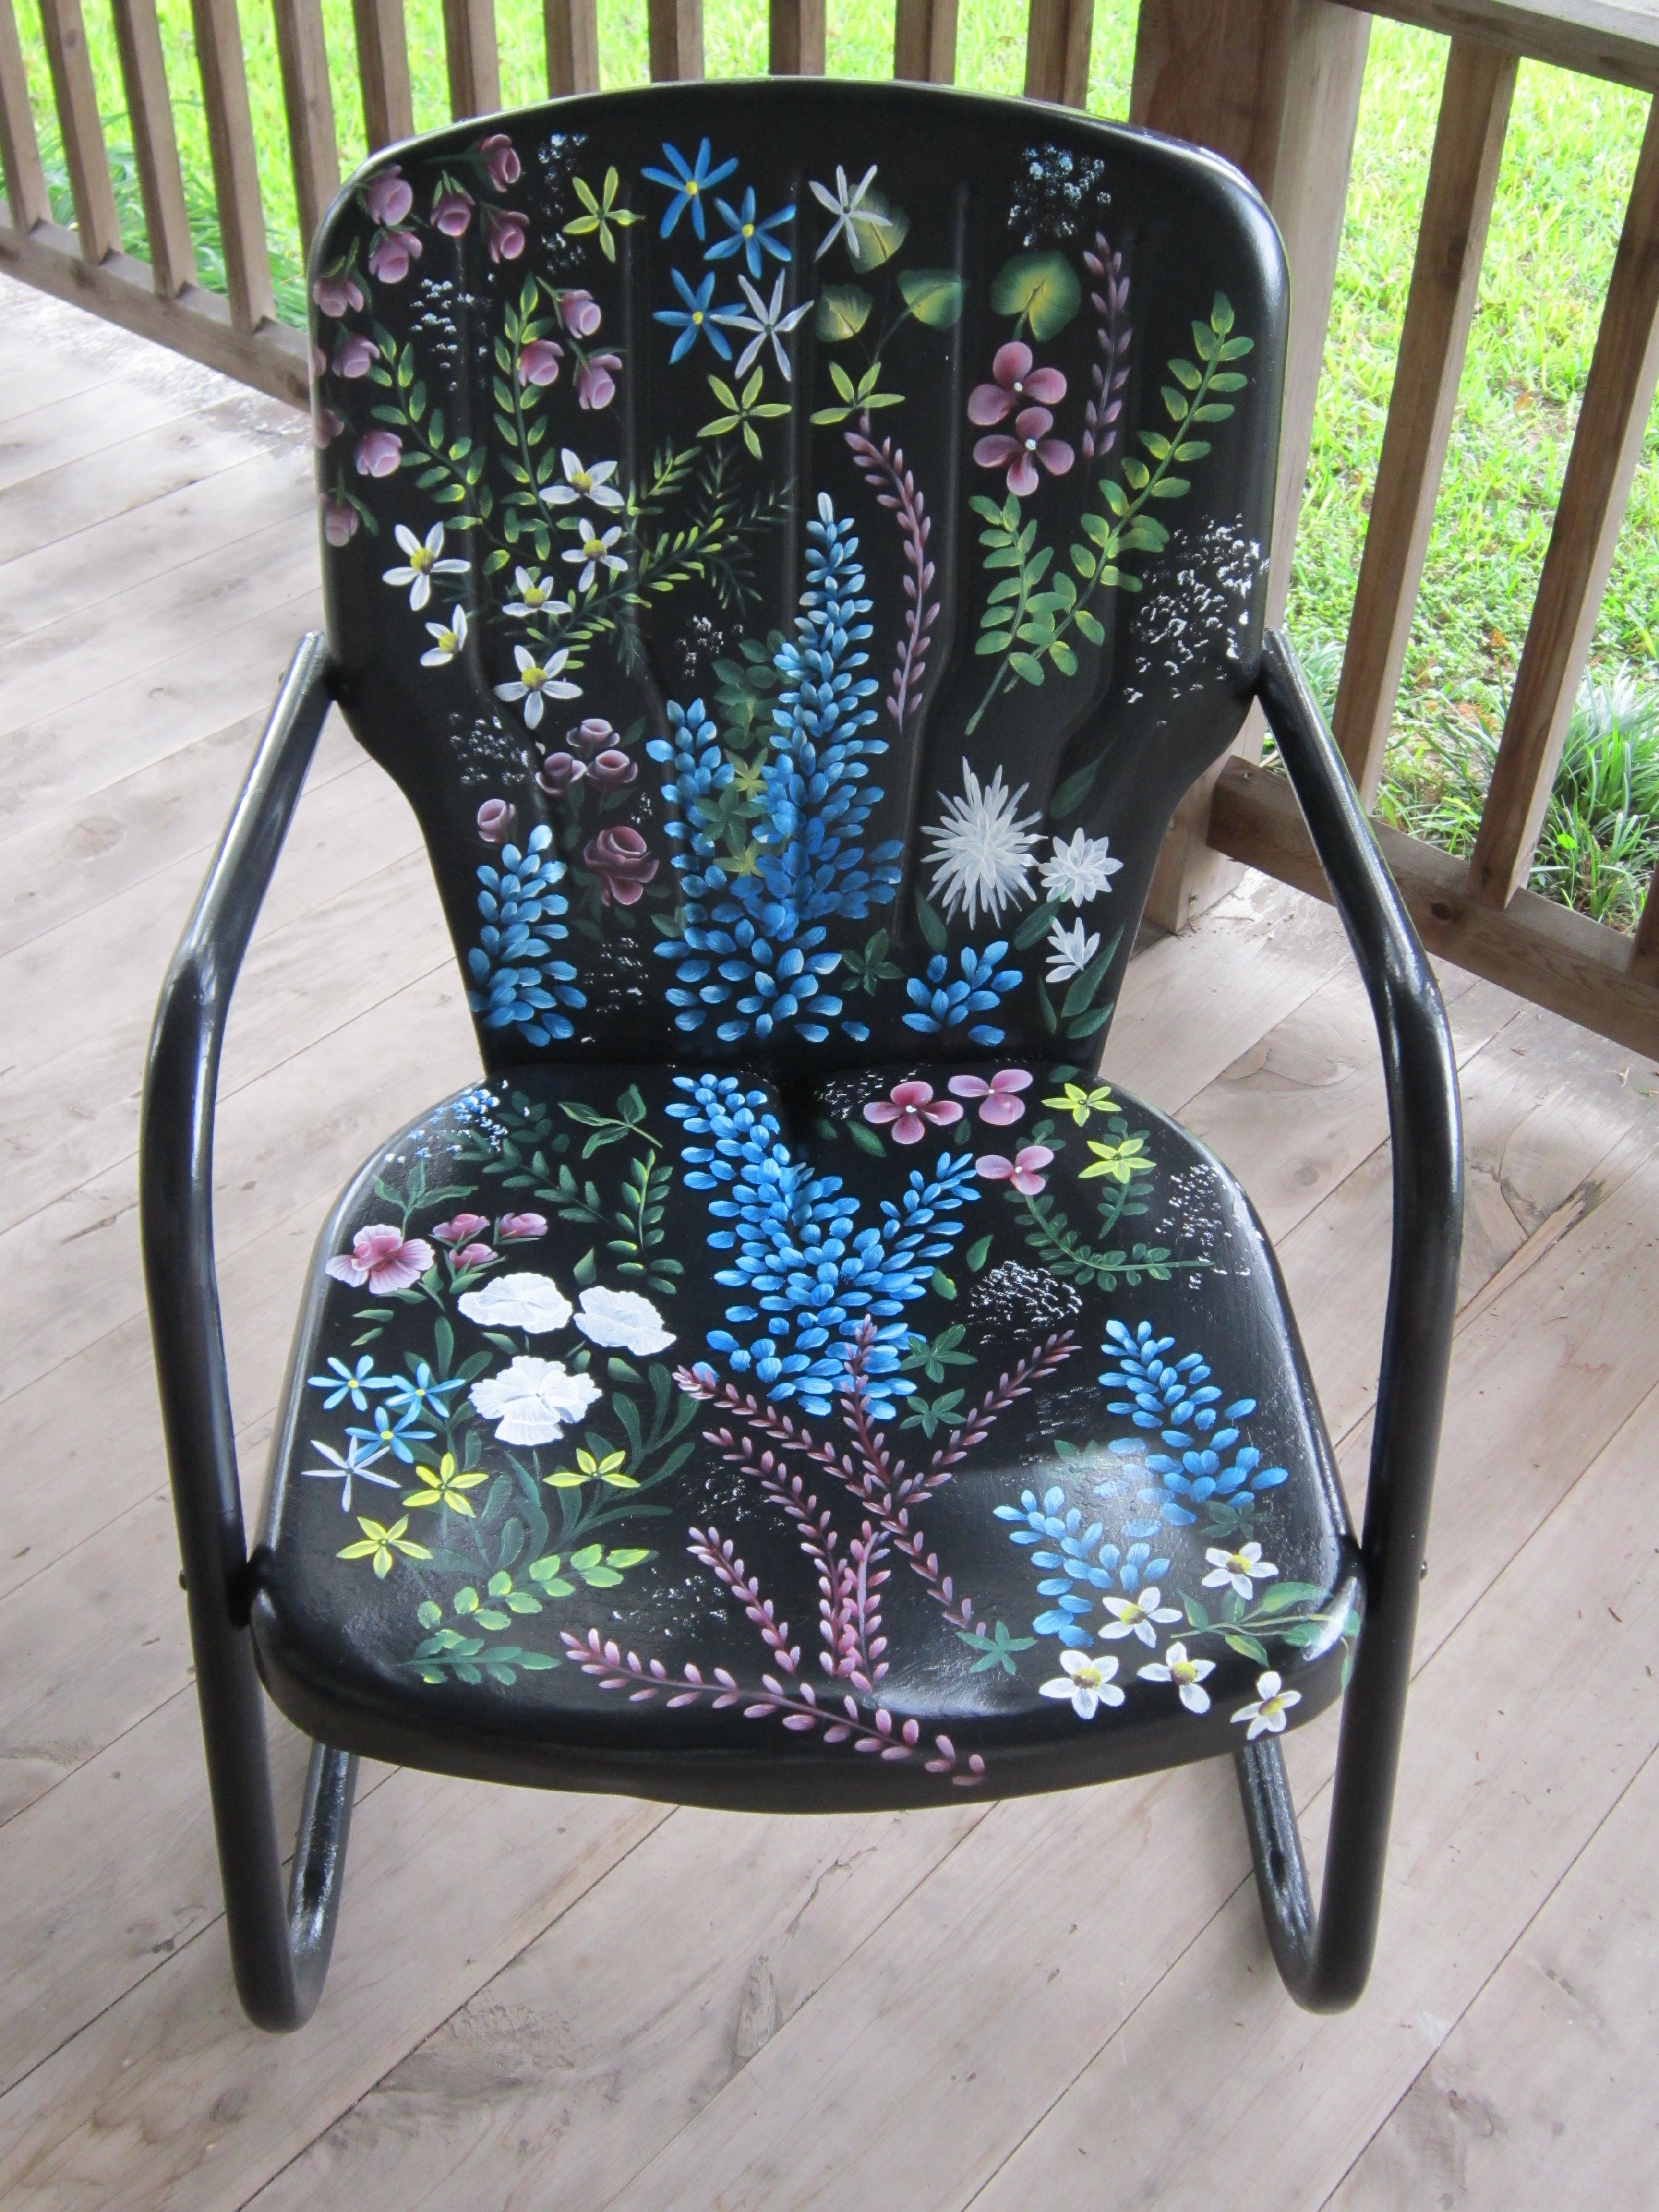 Vintage S Patio Pool Lawn Garden Porch Chairs